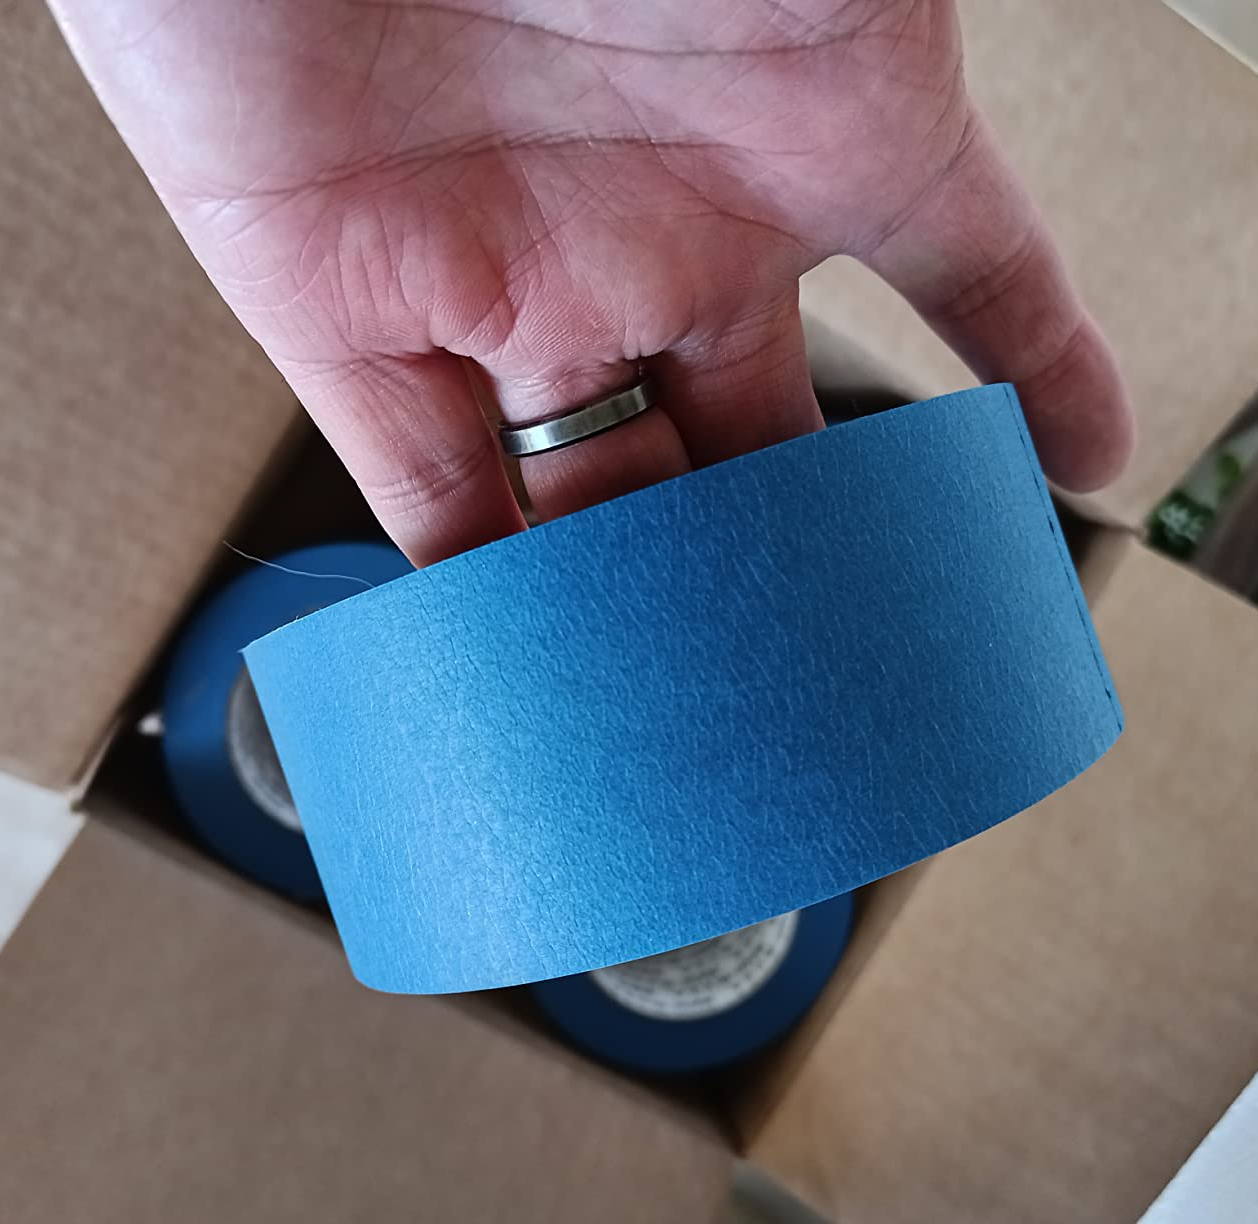 Where To Buy Blue Painters Tape